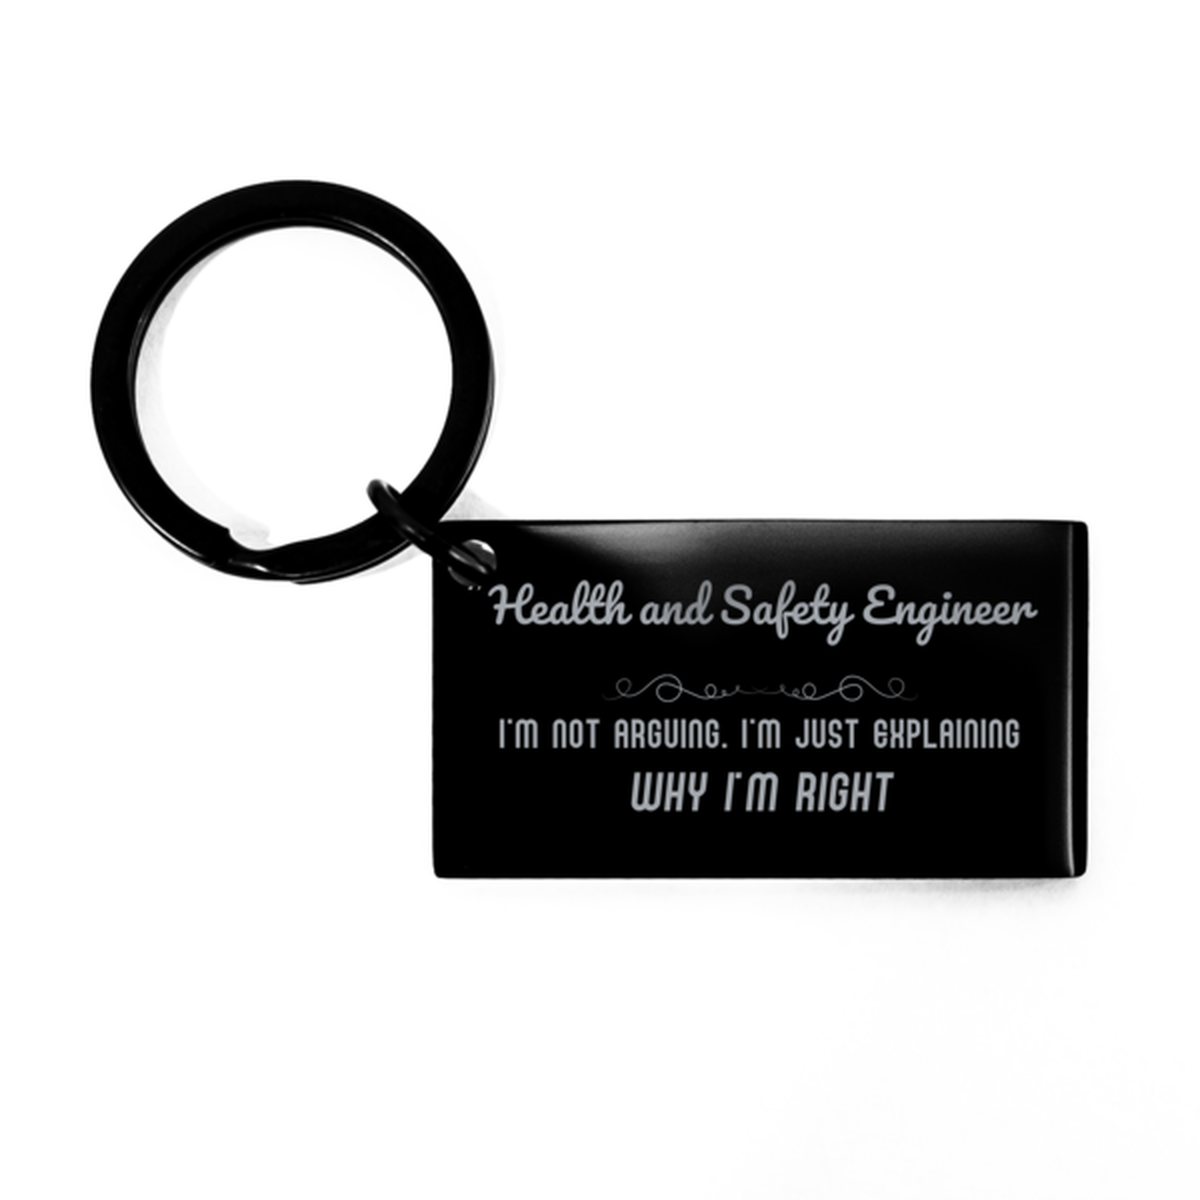 Health and Safety Engineer I'm not Arguing. I'm Just Explaining Why I'm RIGHT Keychain, Funny Saying Quote Health and Safety Engineer Gifts For Health and Safety Engineer Graduation Birthday Christmas Gifts for Men Women Coworker